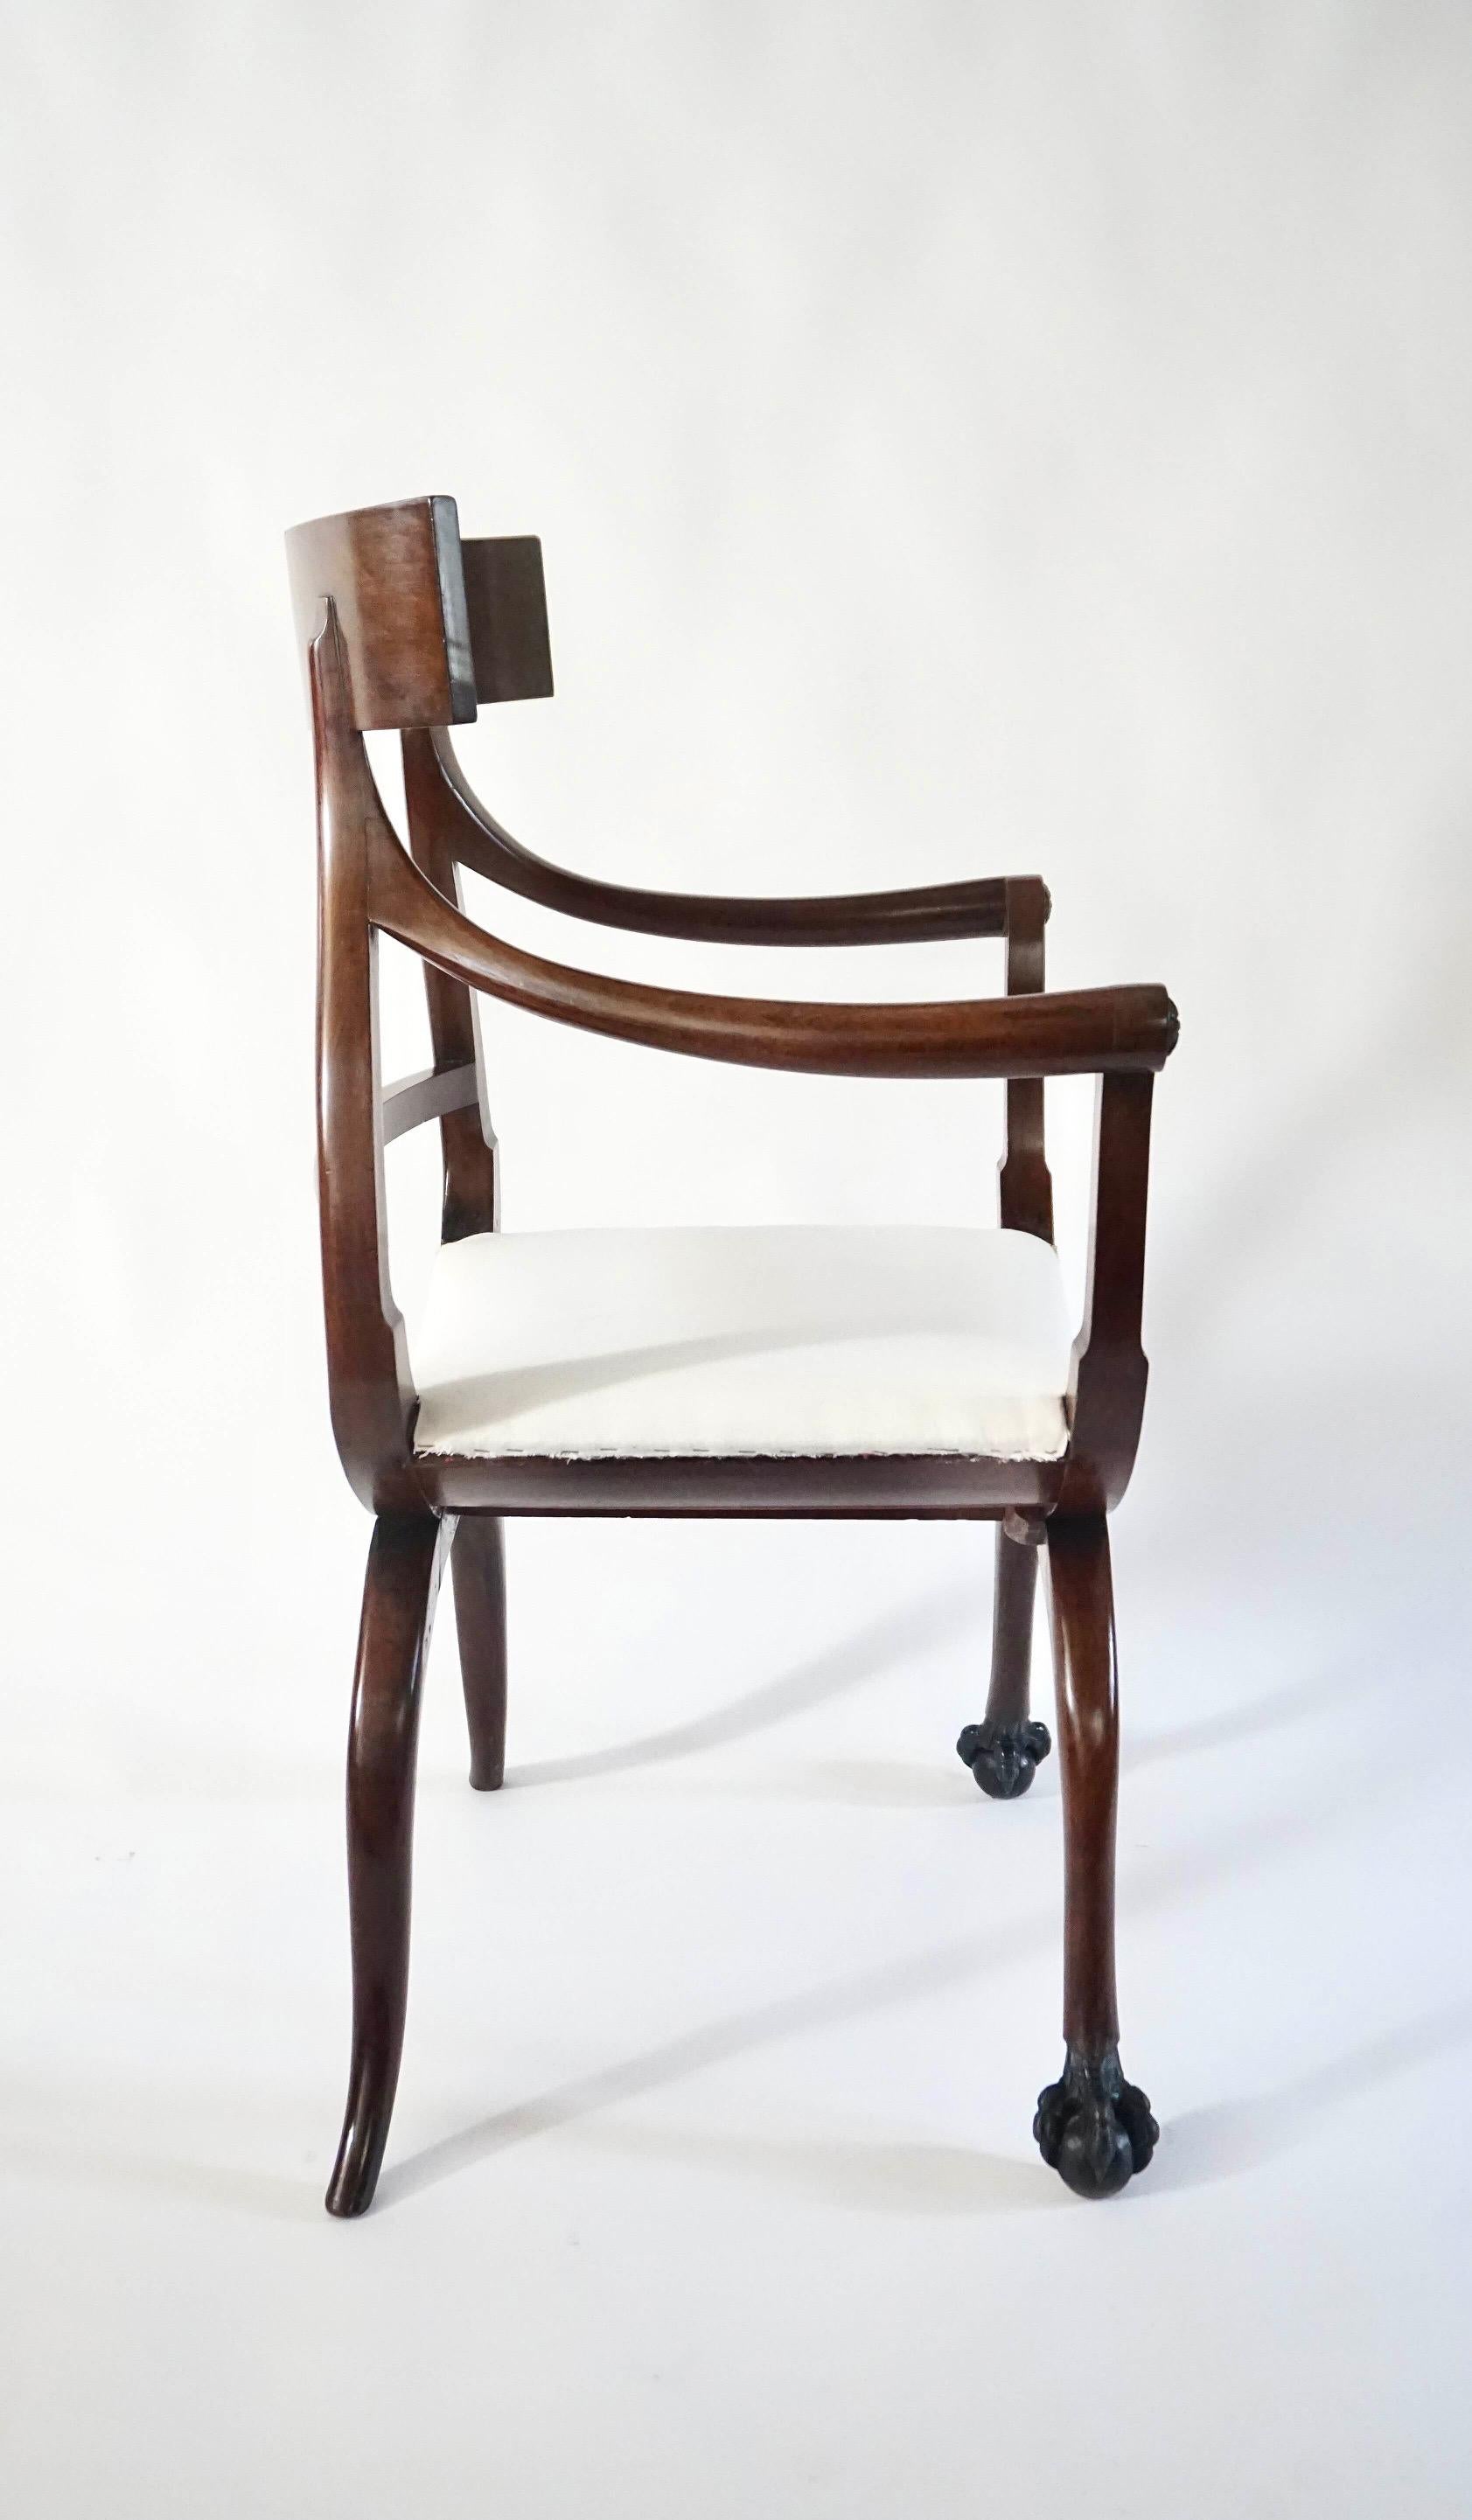 Russian Neoclassical Mahogany Armchairs, Pair, circa 1800 In Good Condition For Sale In Kinderhook, NY